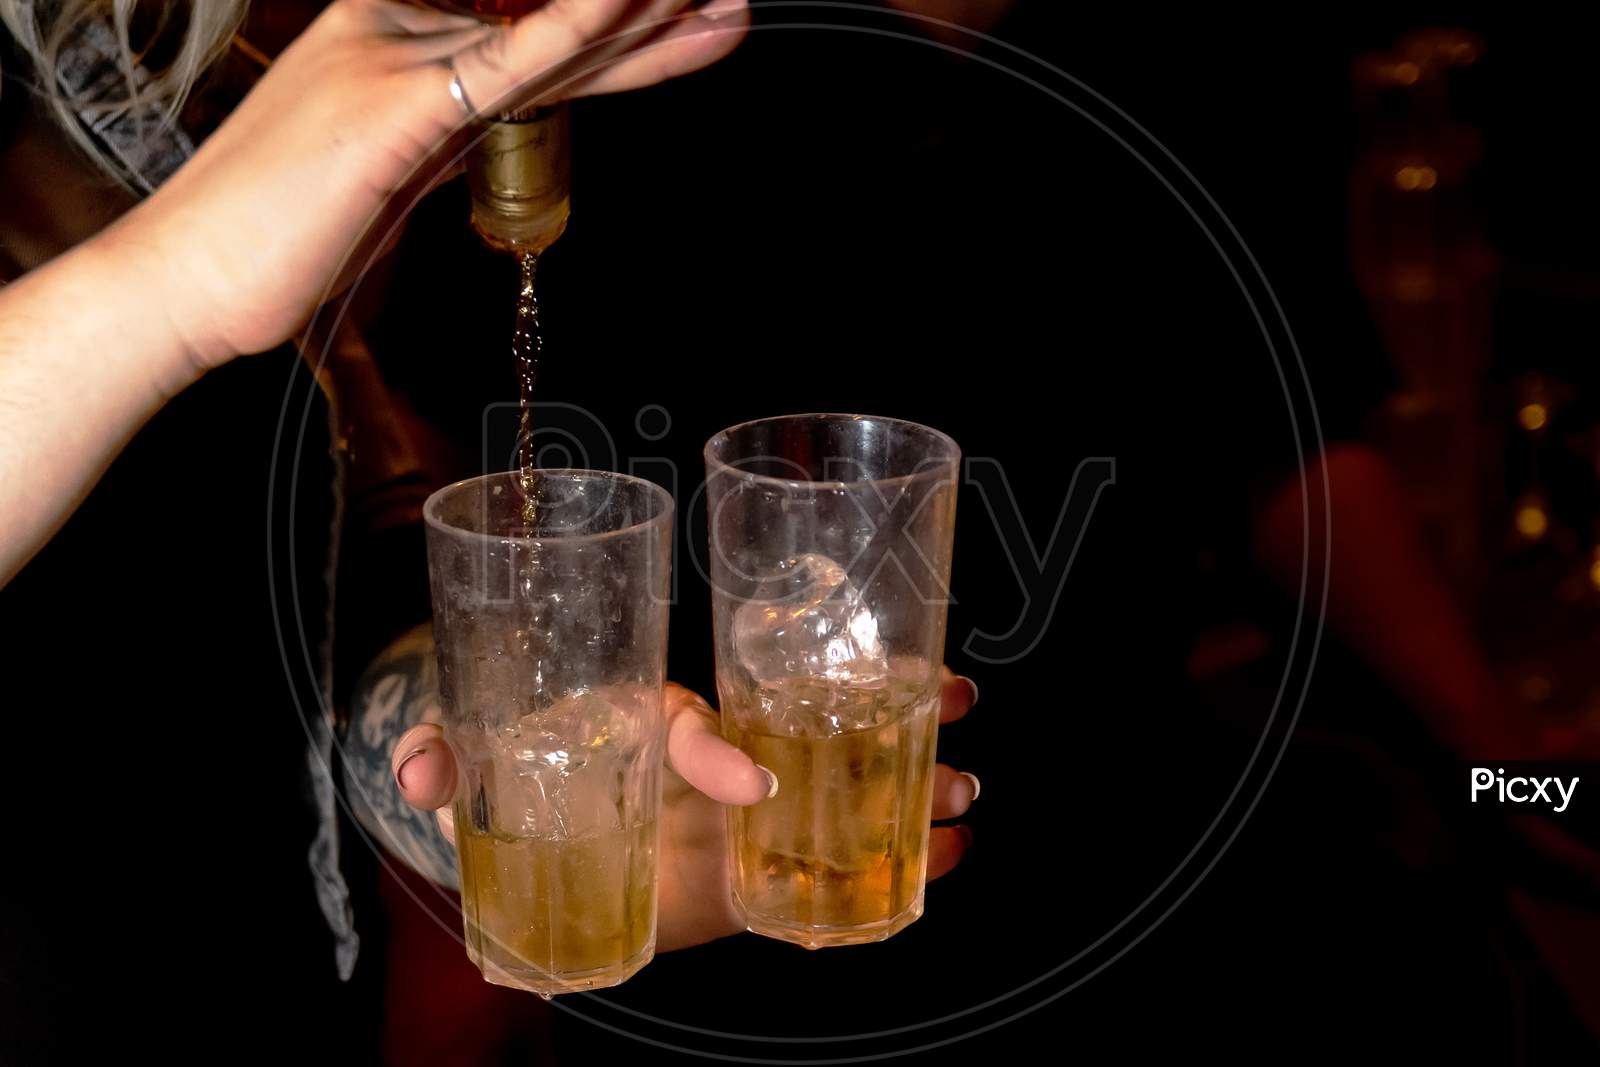 Woman Serving Drink In Two Glasses